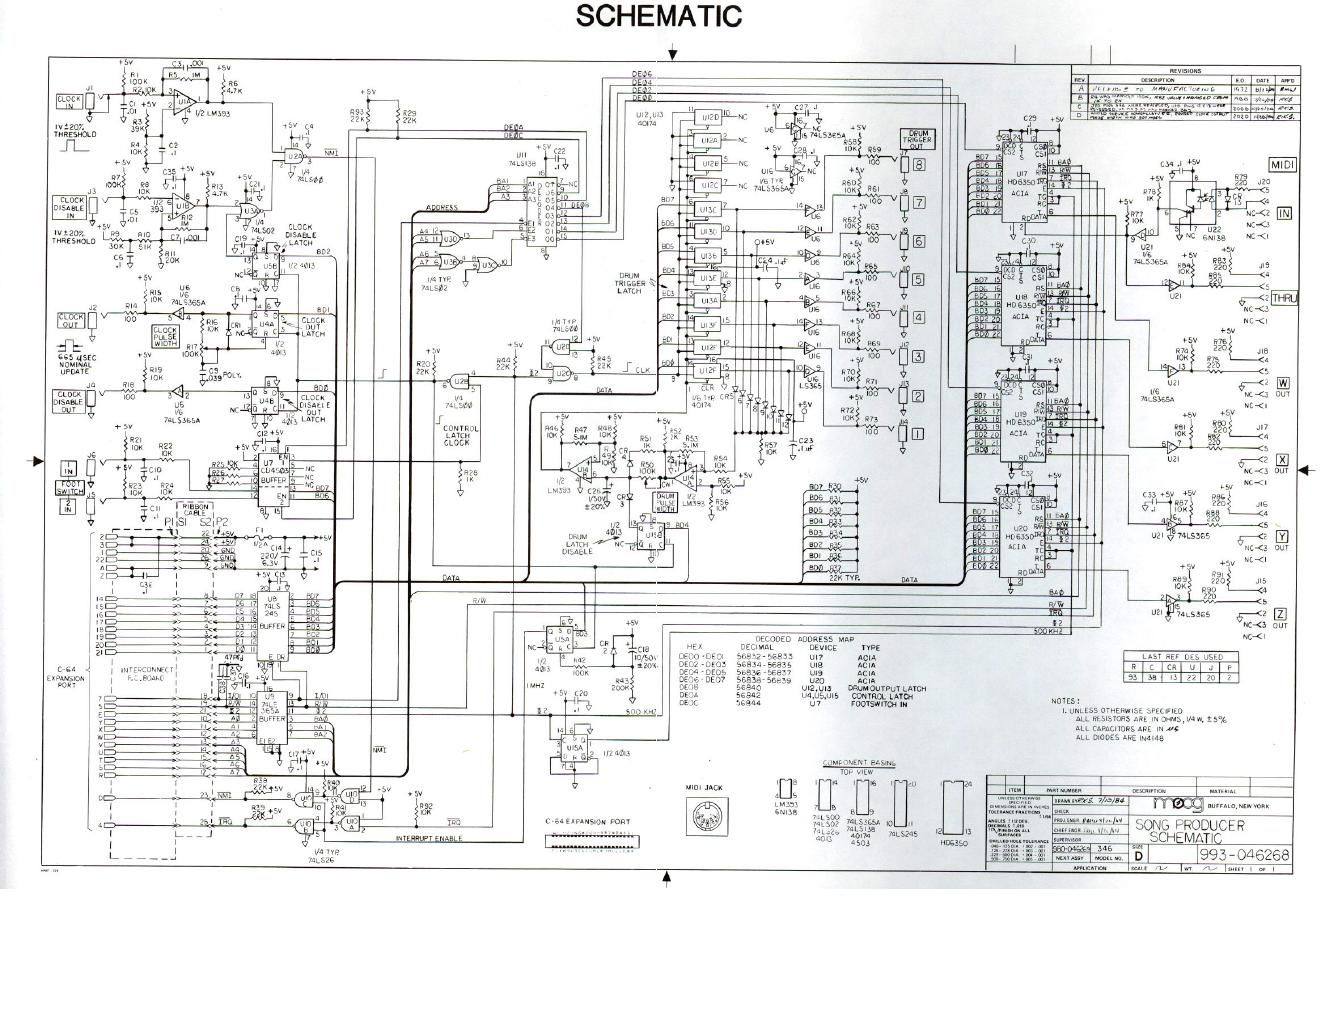 moog song producer schematic